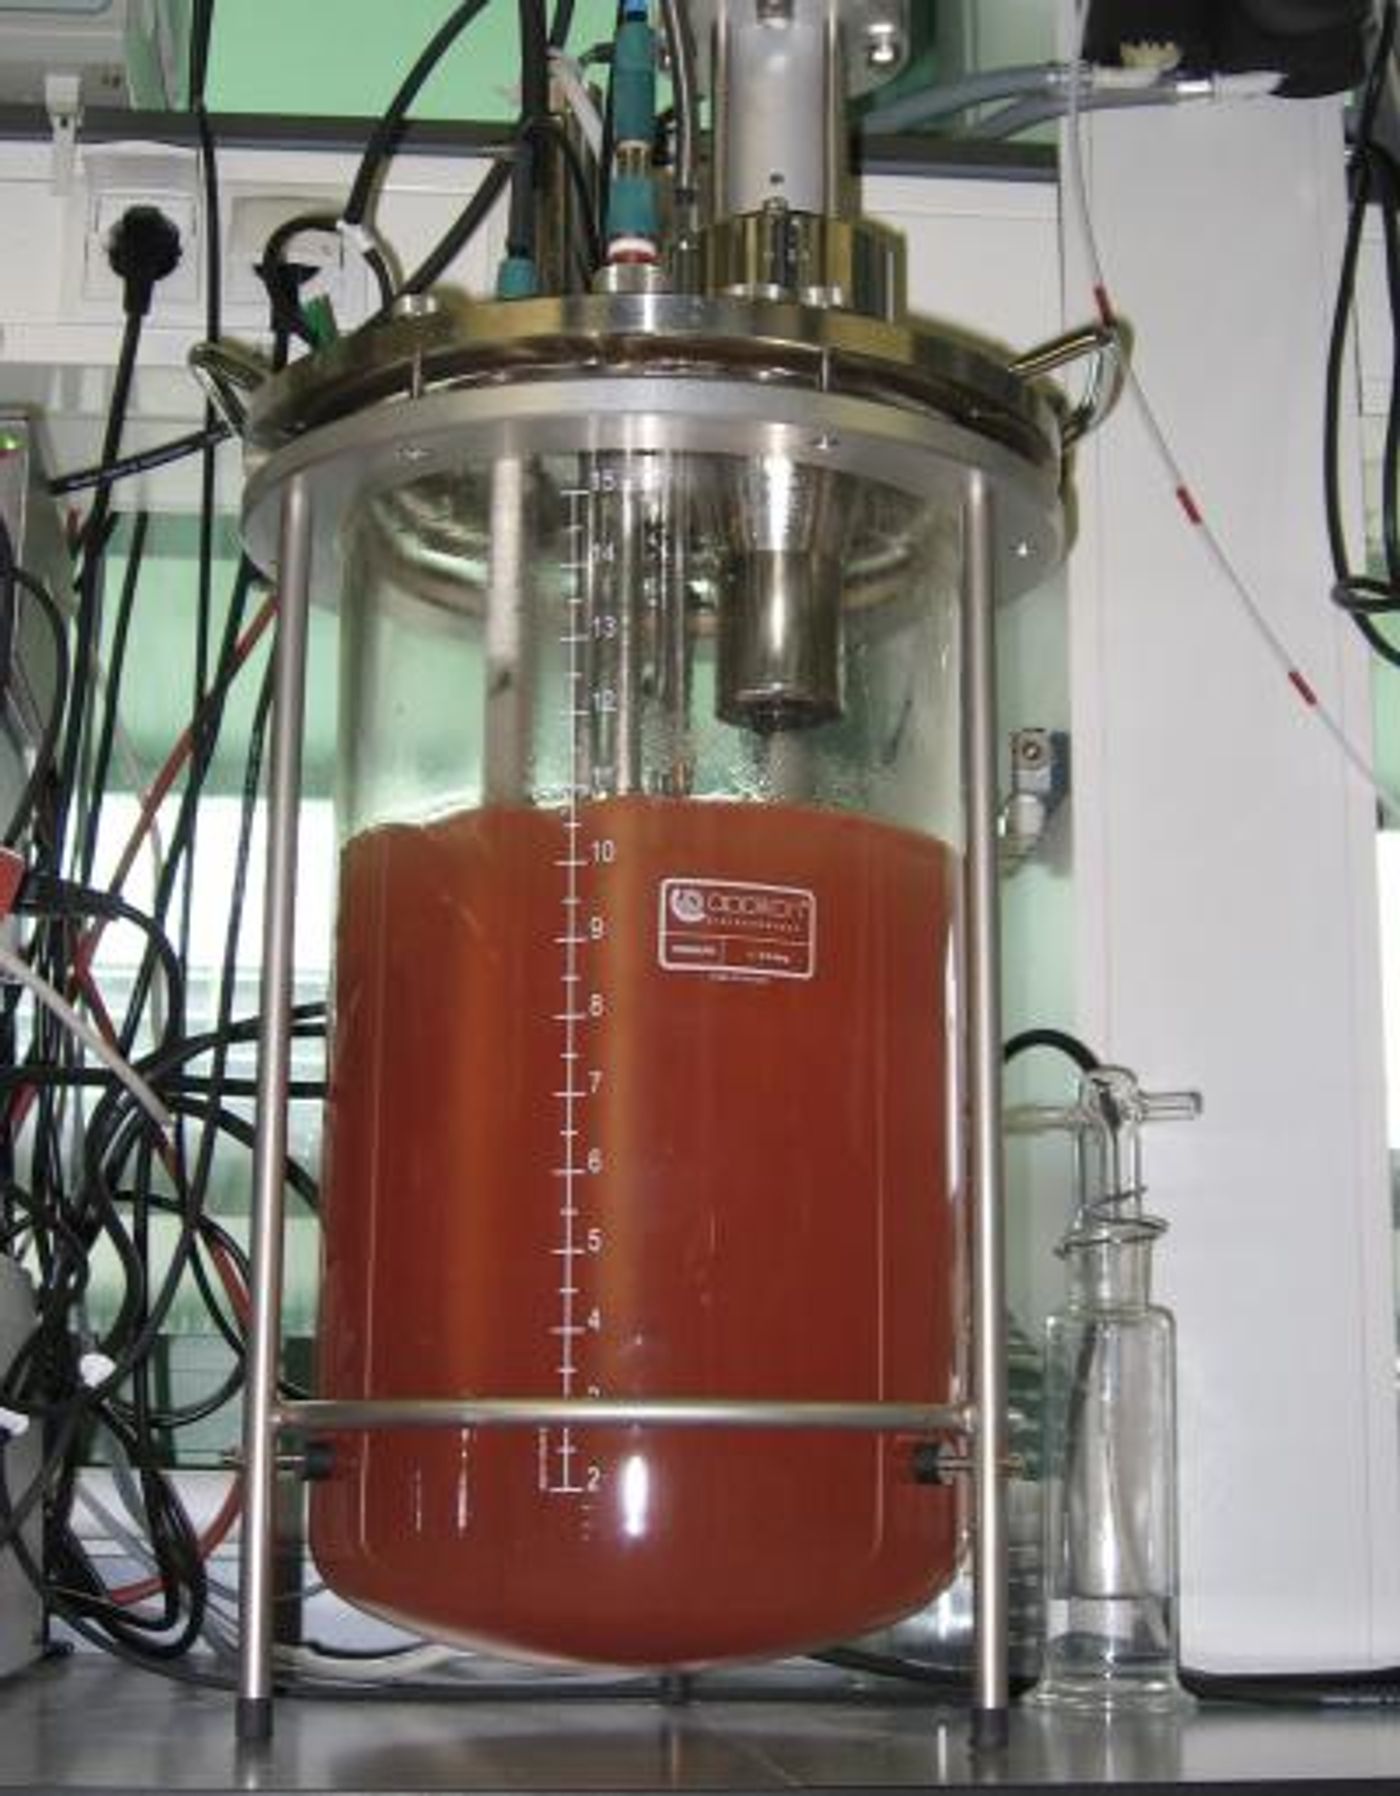 An anammox culture is in a membrane bioreactor. The red color is due to the heme c group of the protein cytochrome c that plays an important role in the anammox metabolism. / Credit: B. Kartal